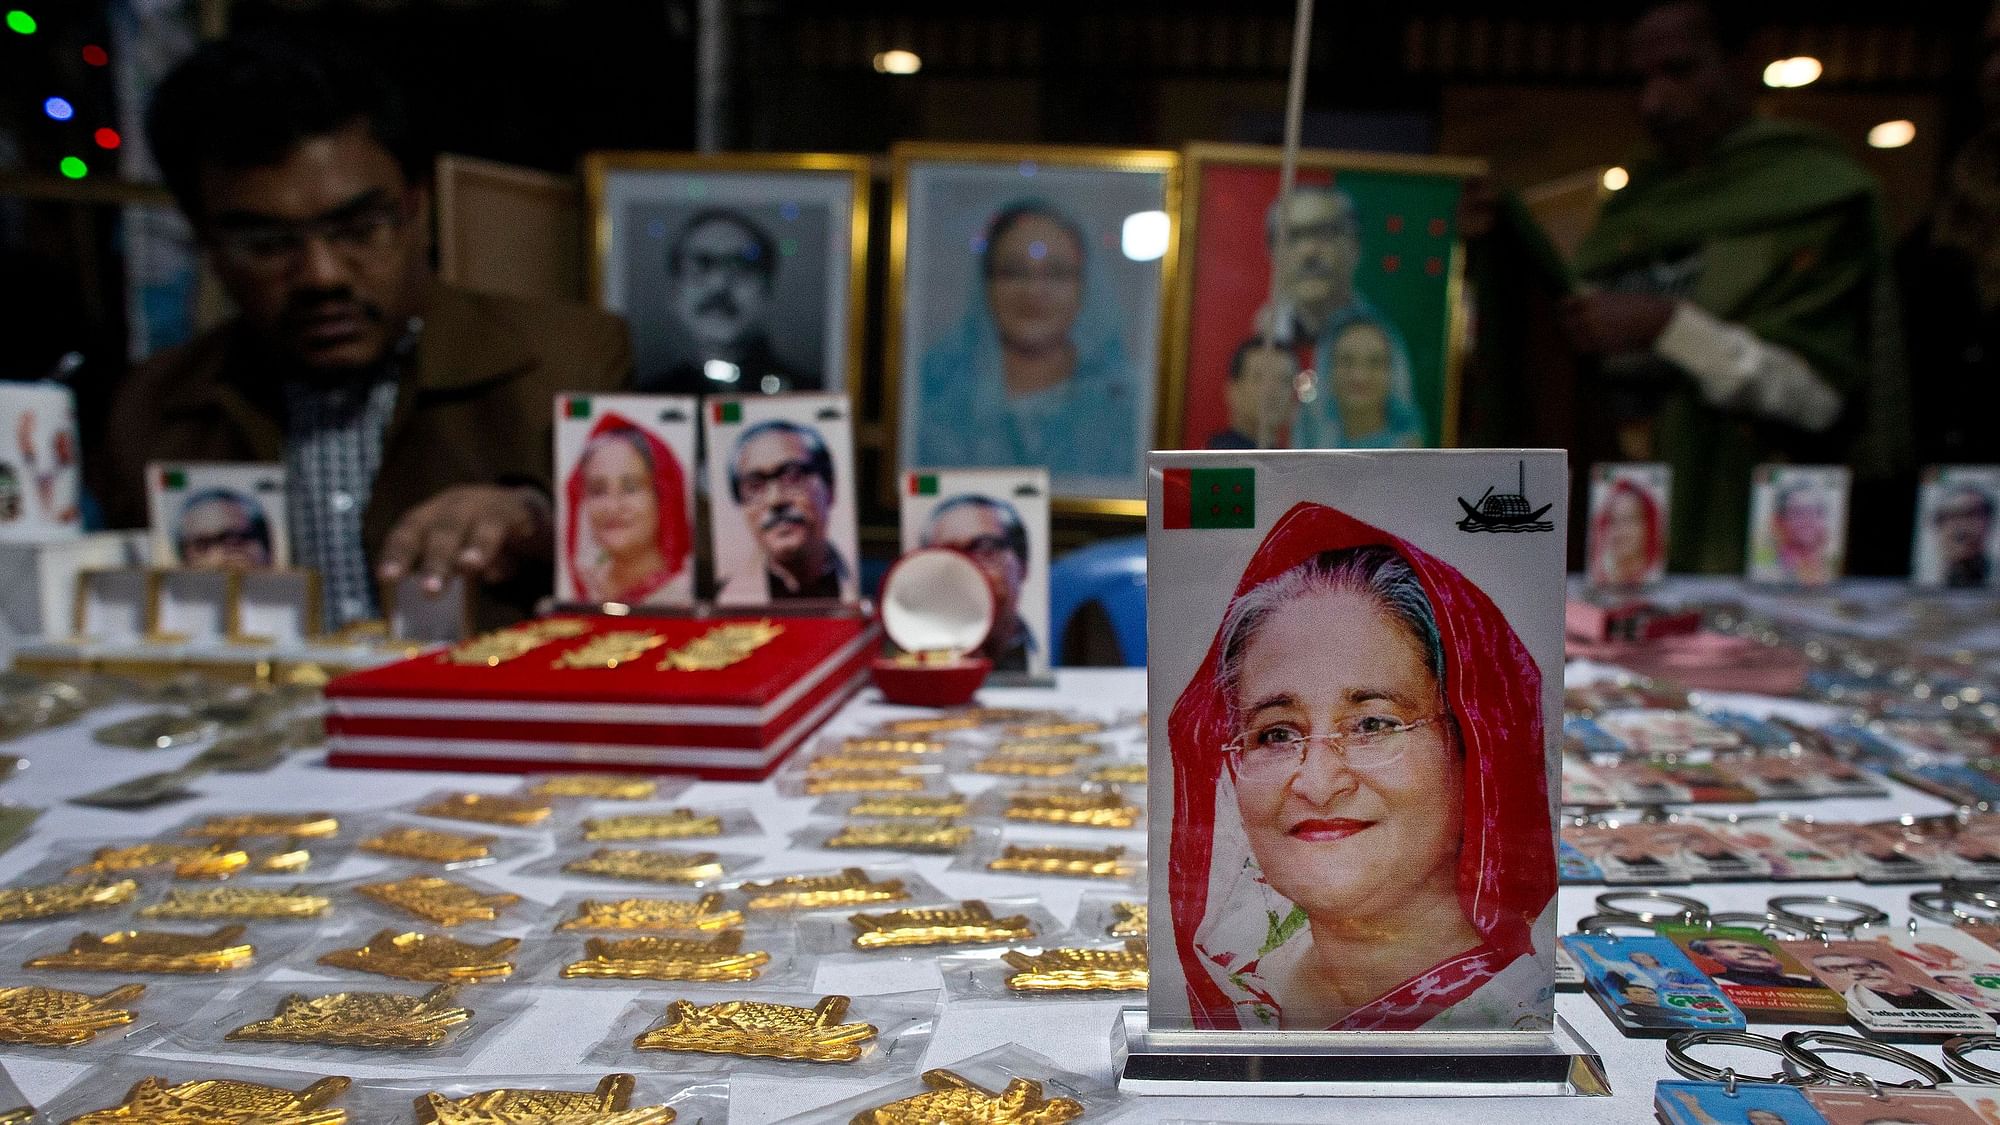 Souvenirs with pictures of Bangladesh Prime Minister Sheikh Hasina, front, and others are put up for sale at a roadside shop ahead of the general elections in Dhaka, Bangladesh.